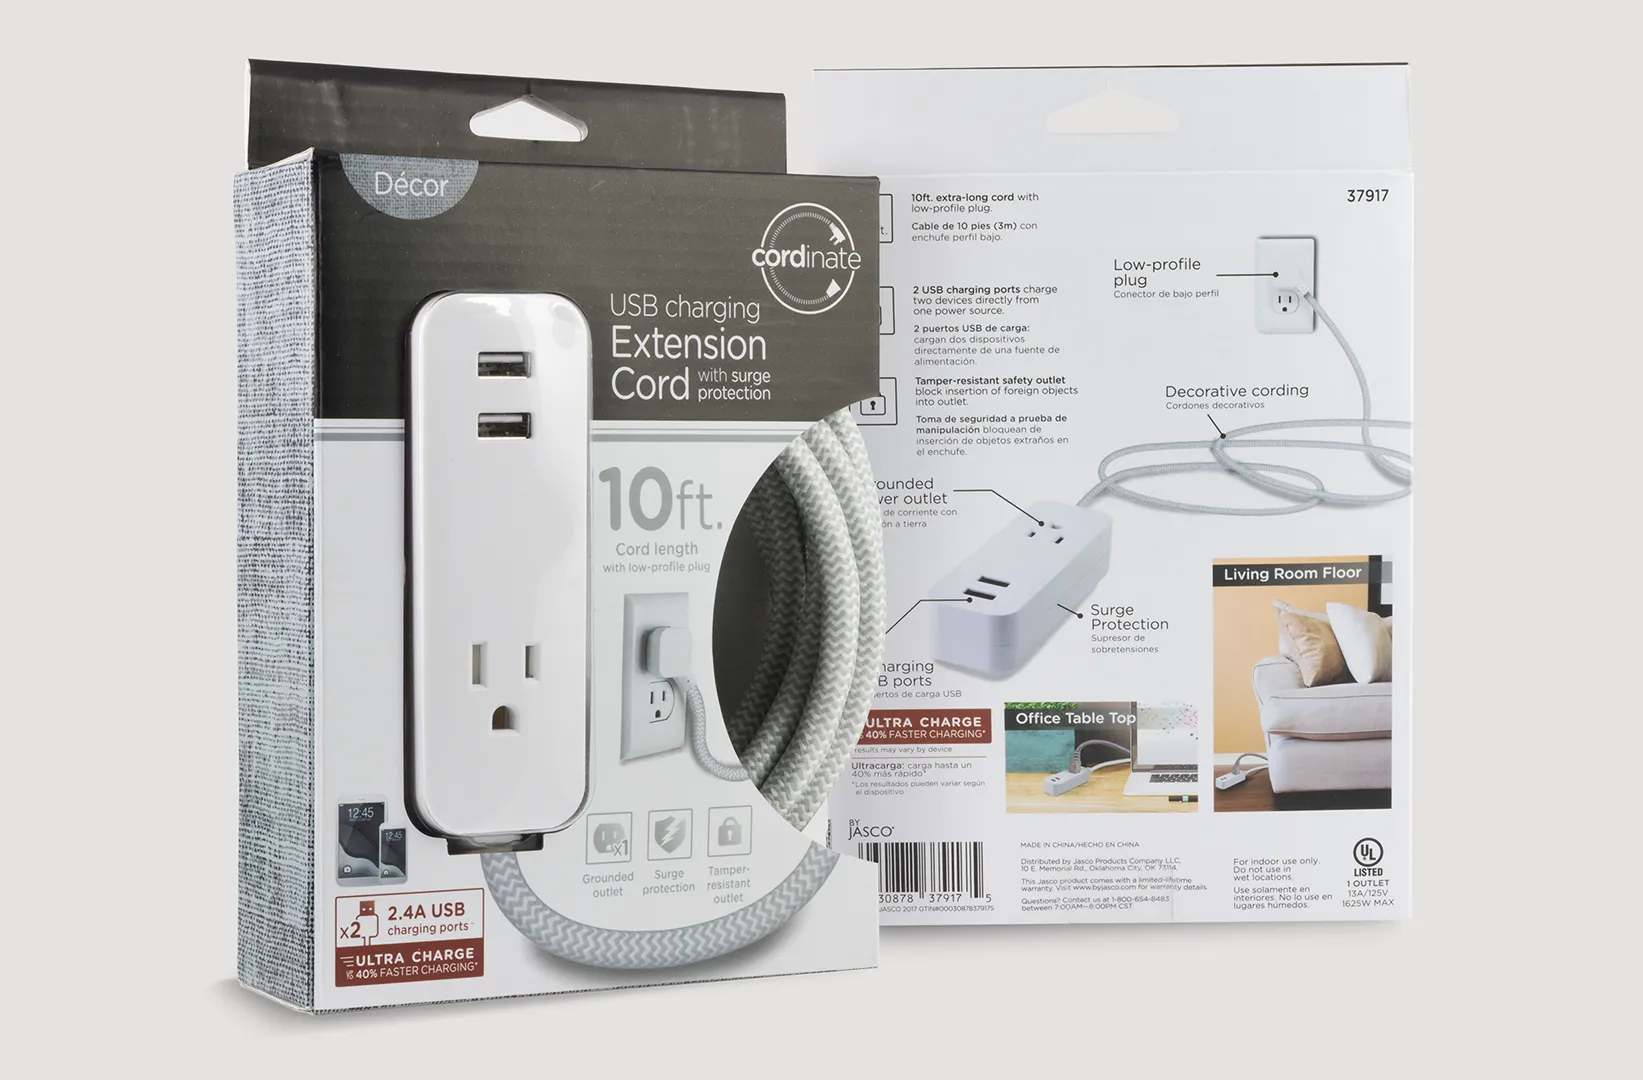 Packaging for a gray 10ft. USB extension cord with a braided fabric cable is displayed against a neutral background.